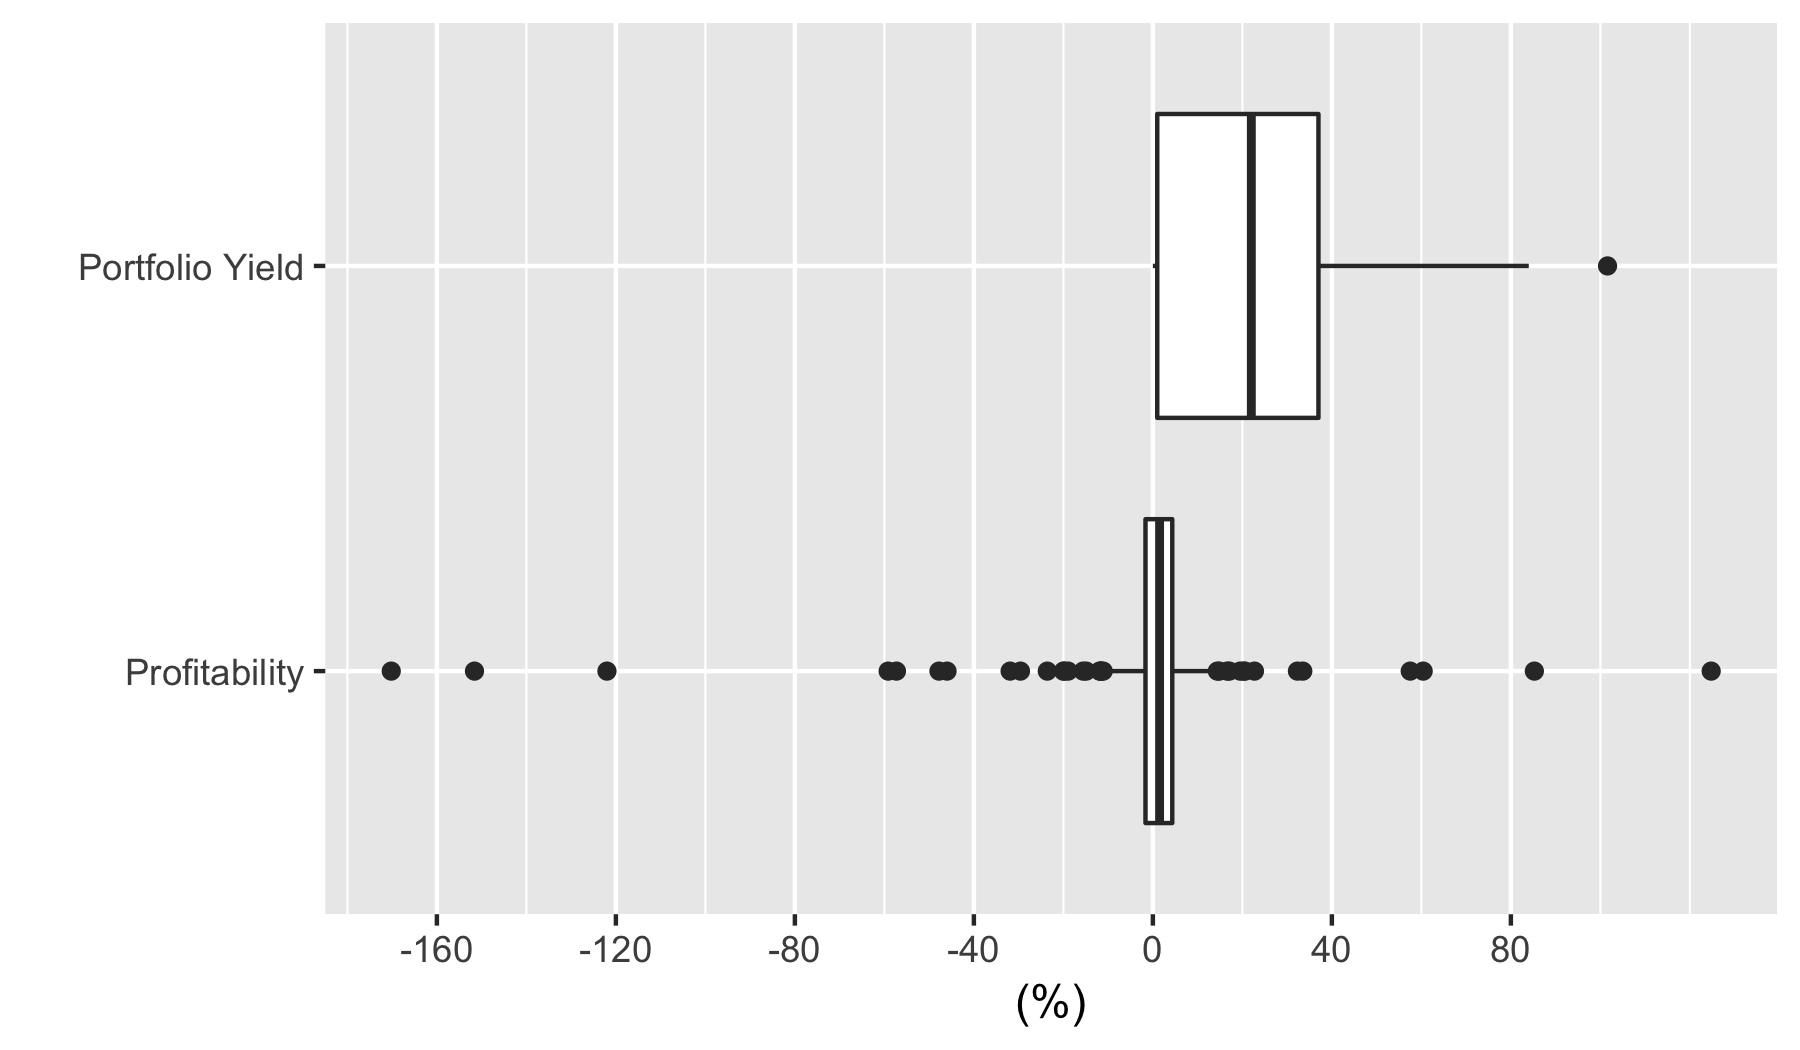 Box plot of field partner Portfolio Yield and Profitability (data is also given in table)